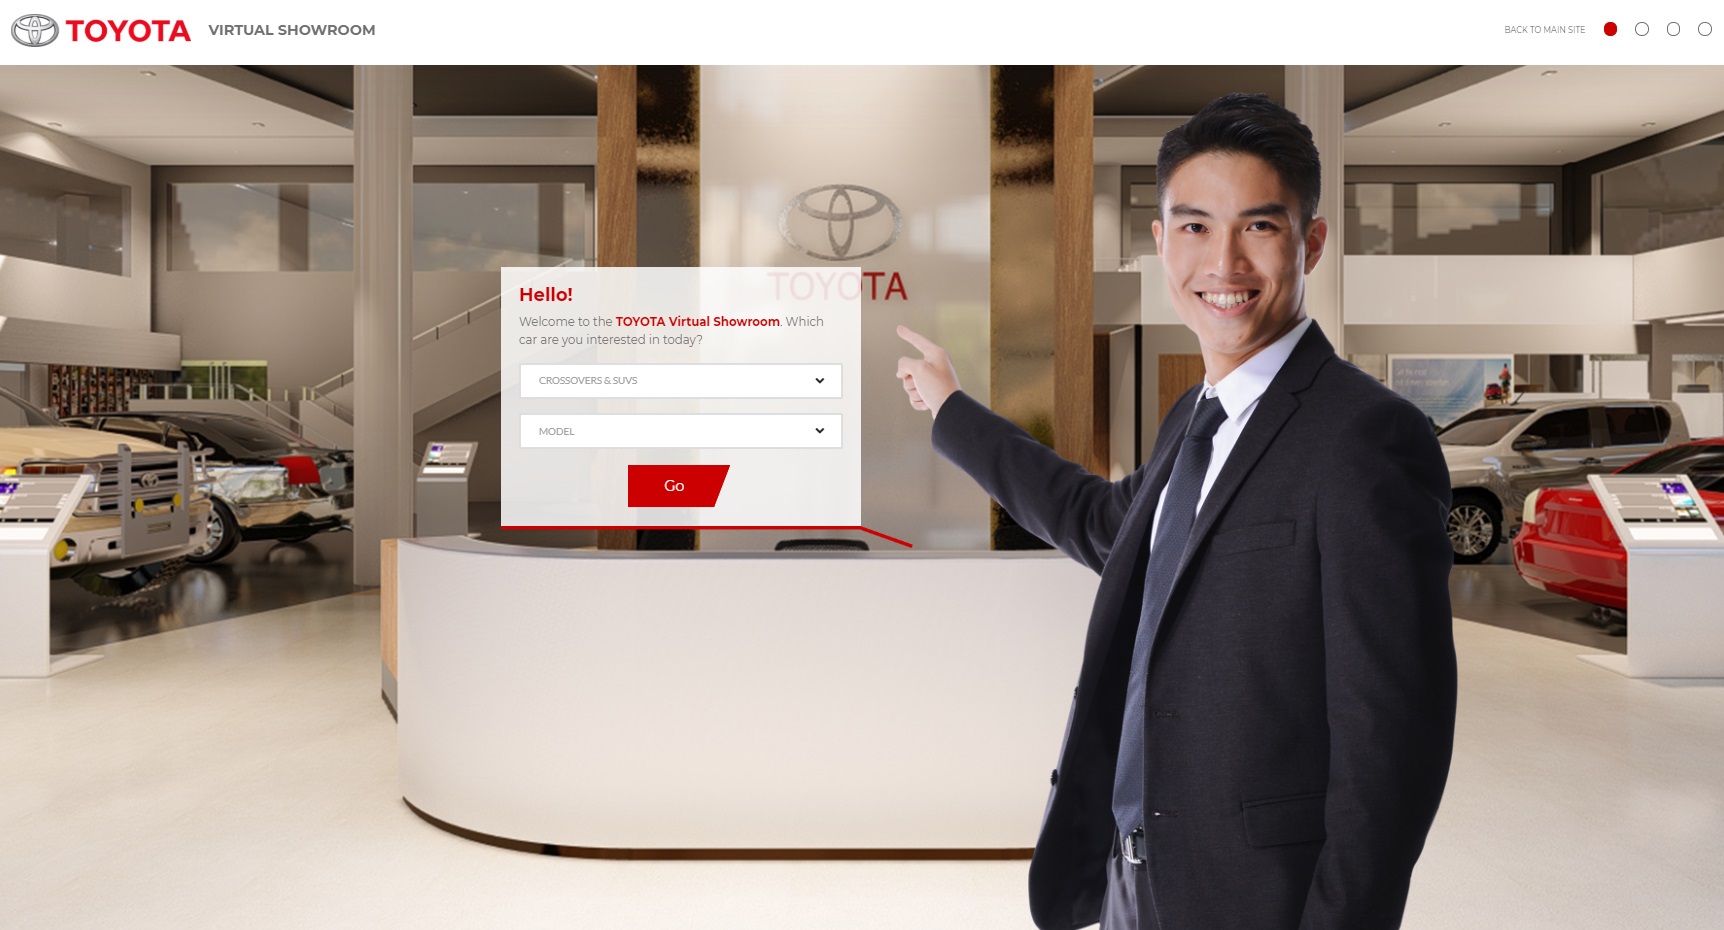 Toyota's Virtual Showroom as Seen From Their Website